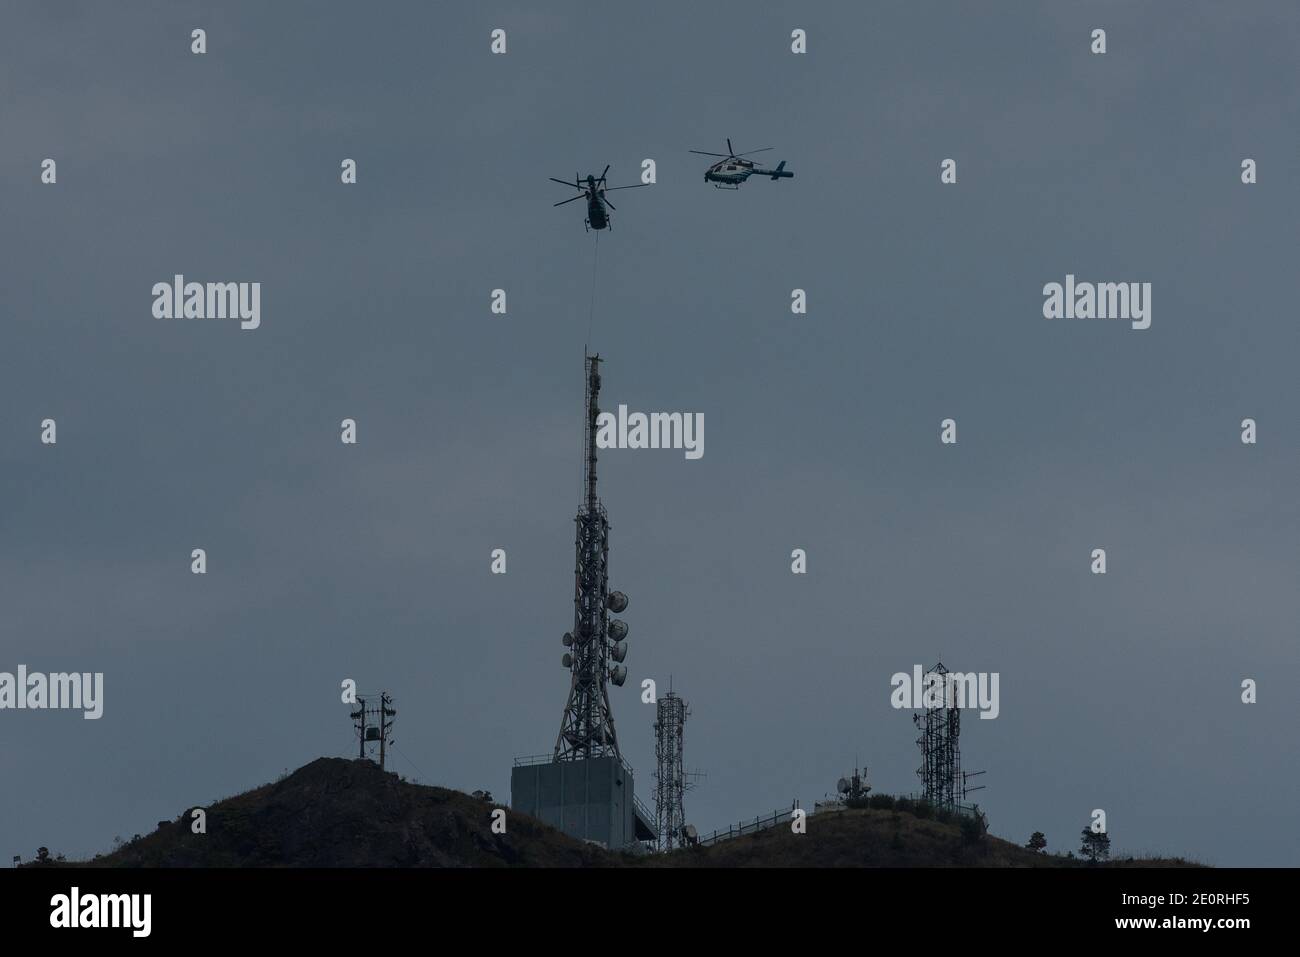 Two helicopters fly above the radio antenna of Kowloon Peak. Stock Photo